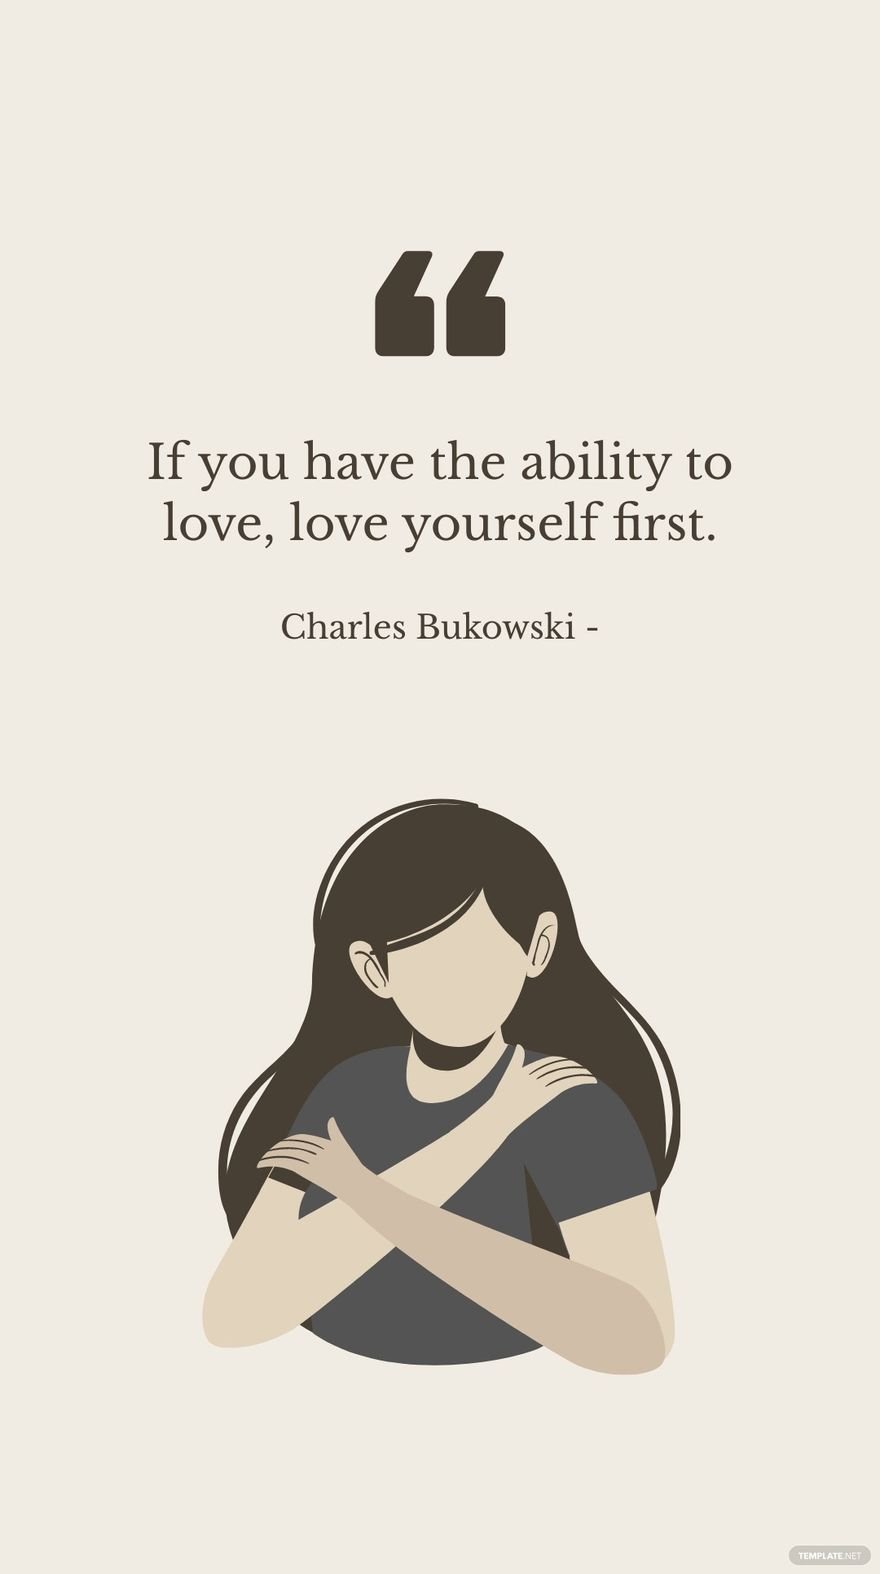 Free Charles Bukowski - If you have the ability to love, love yourself first. in JPG